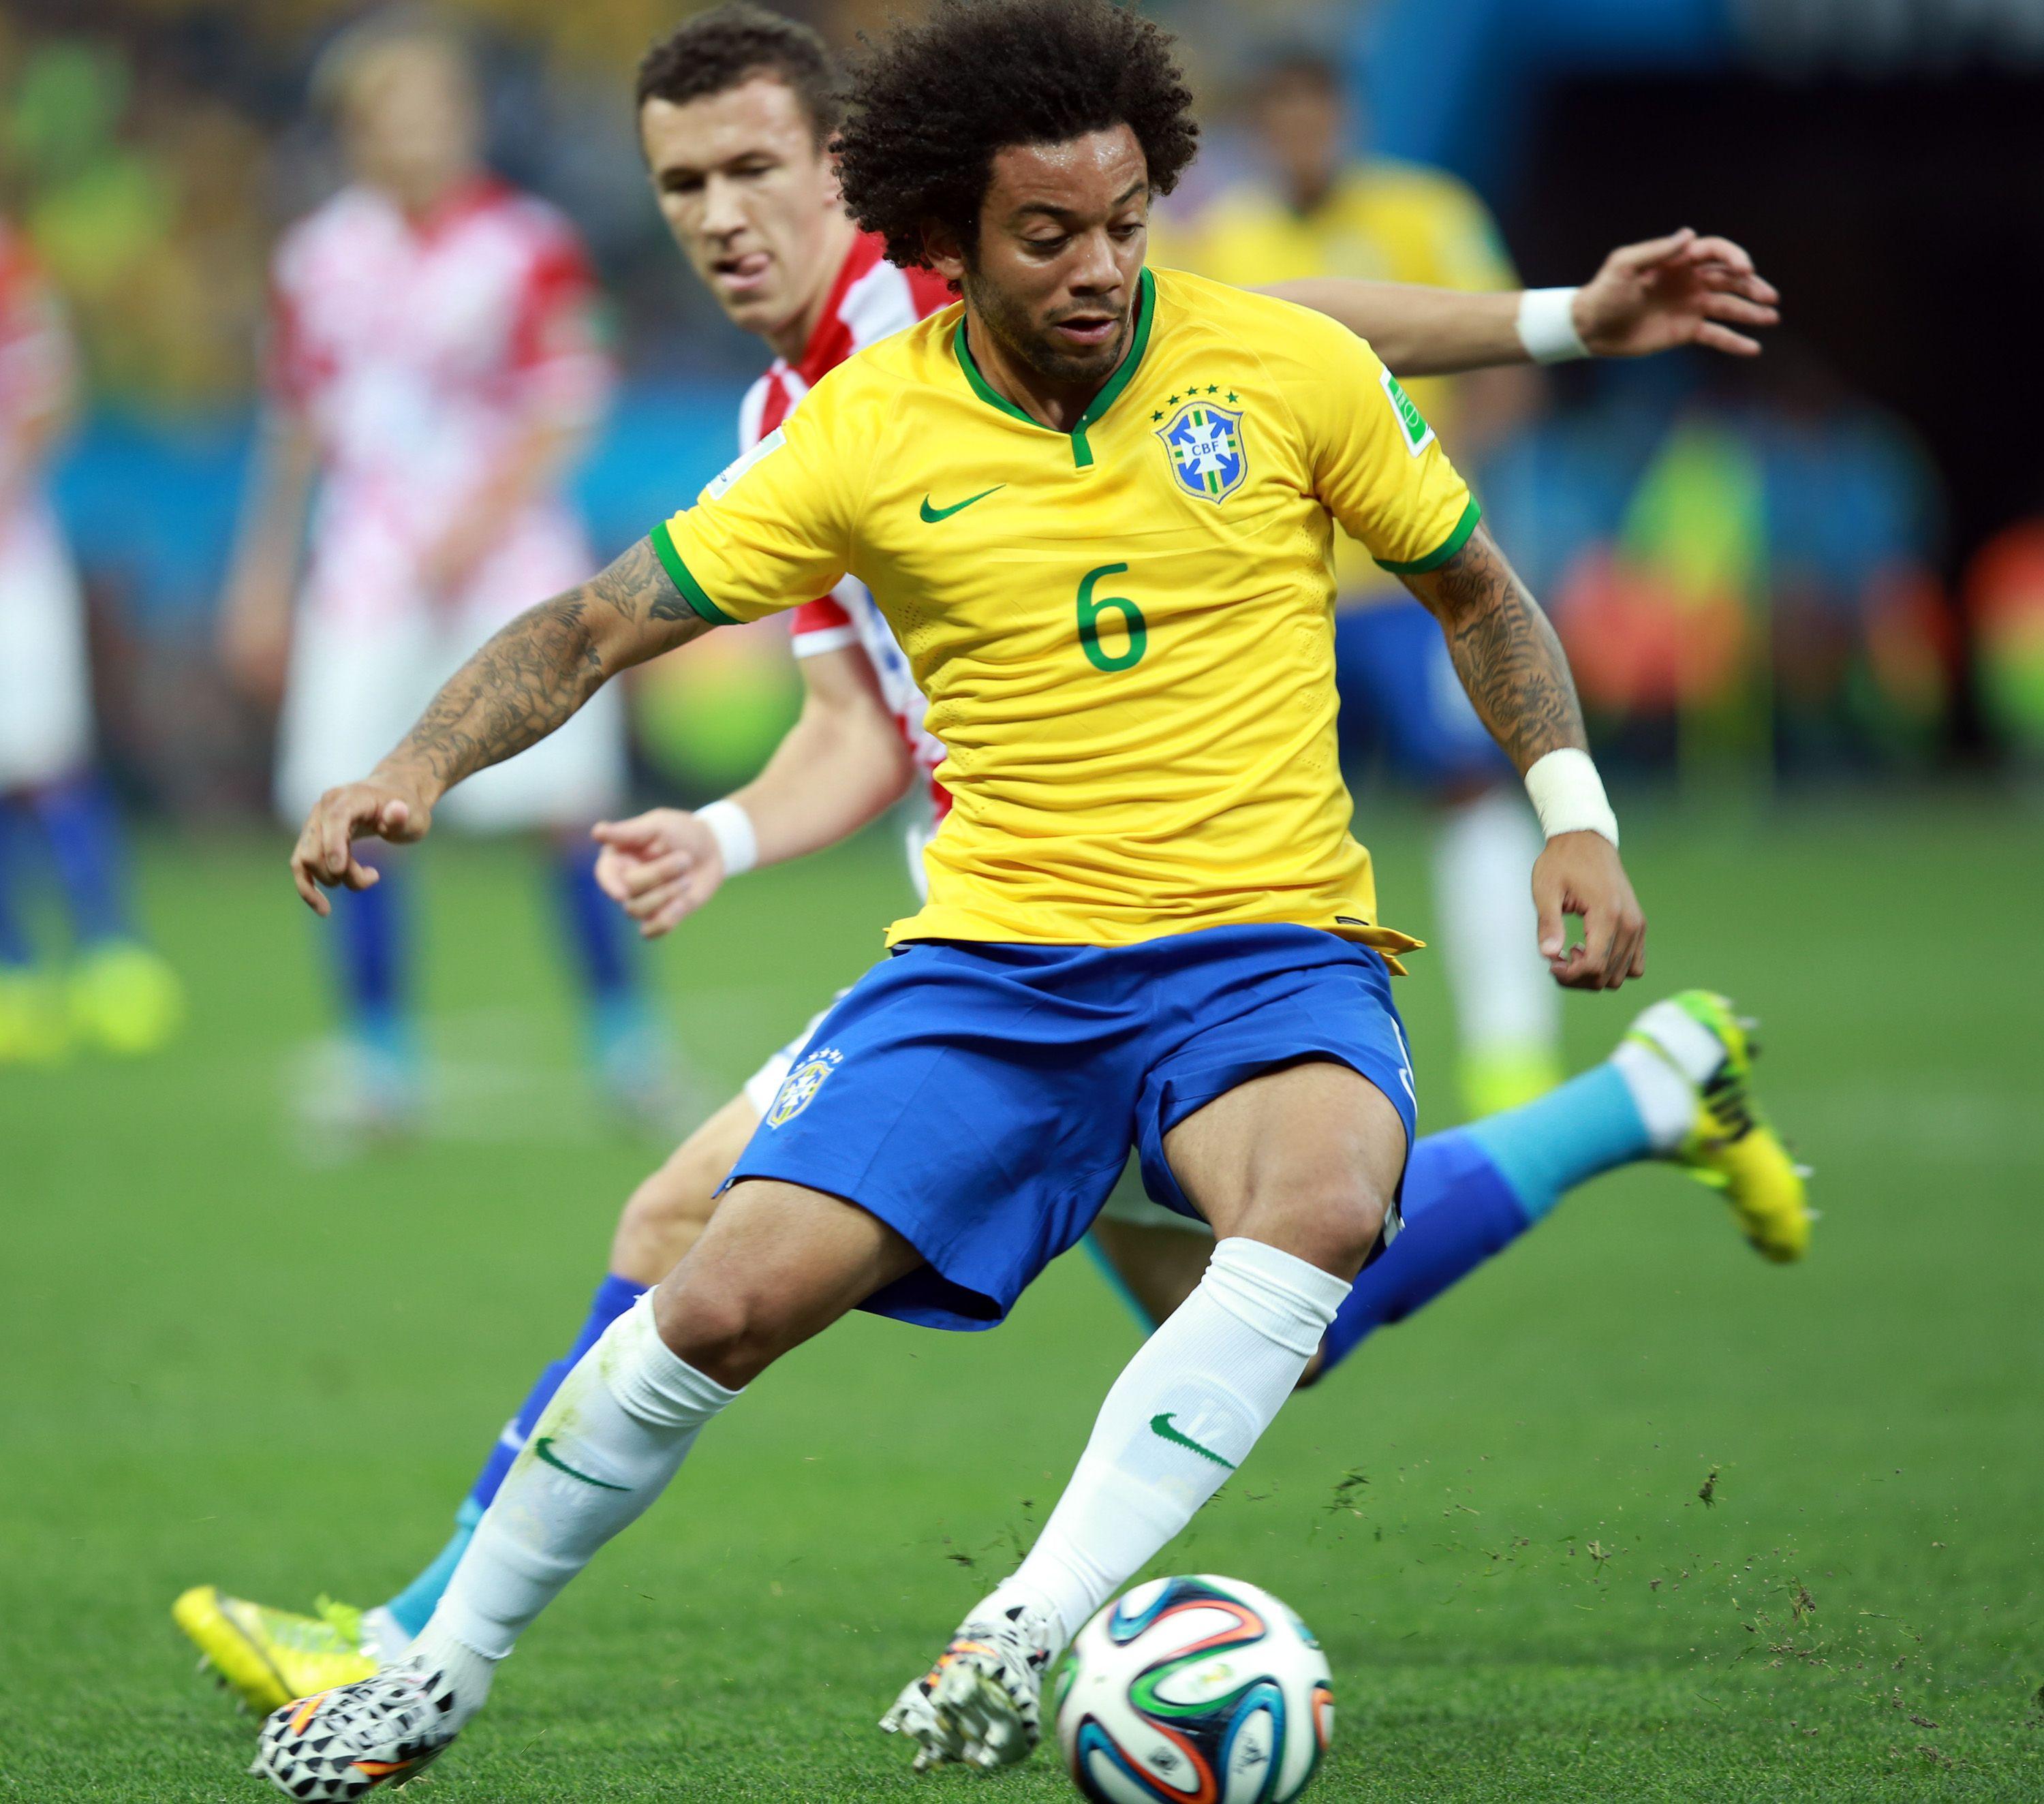 Brazil And Croatia Match At The FIFA World Cup 2014 06 12 53